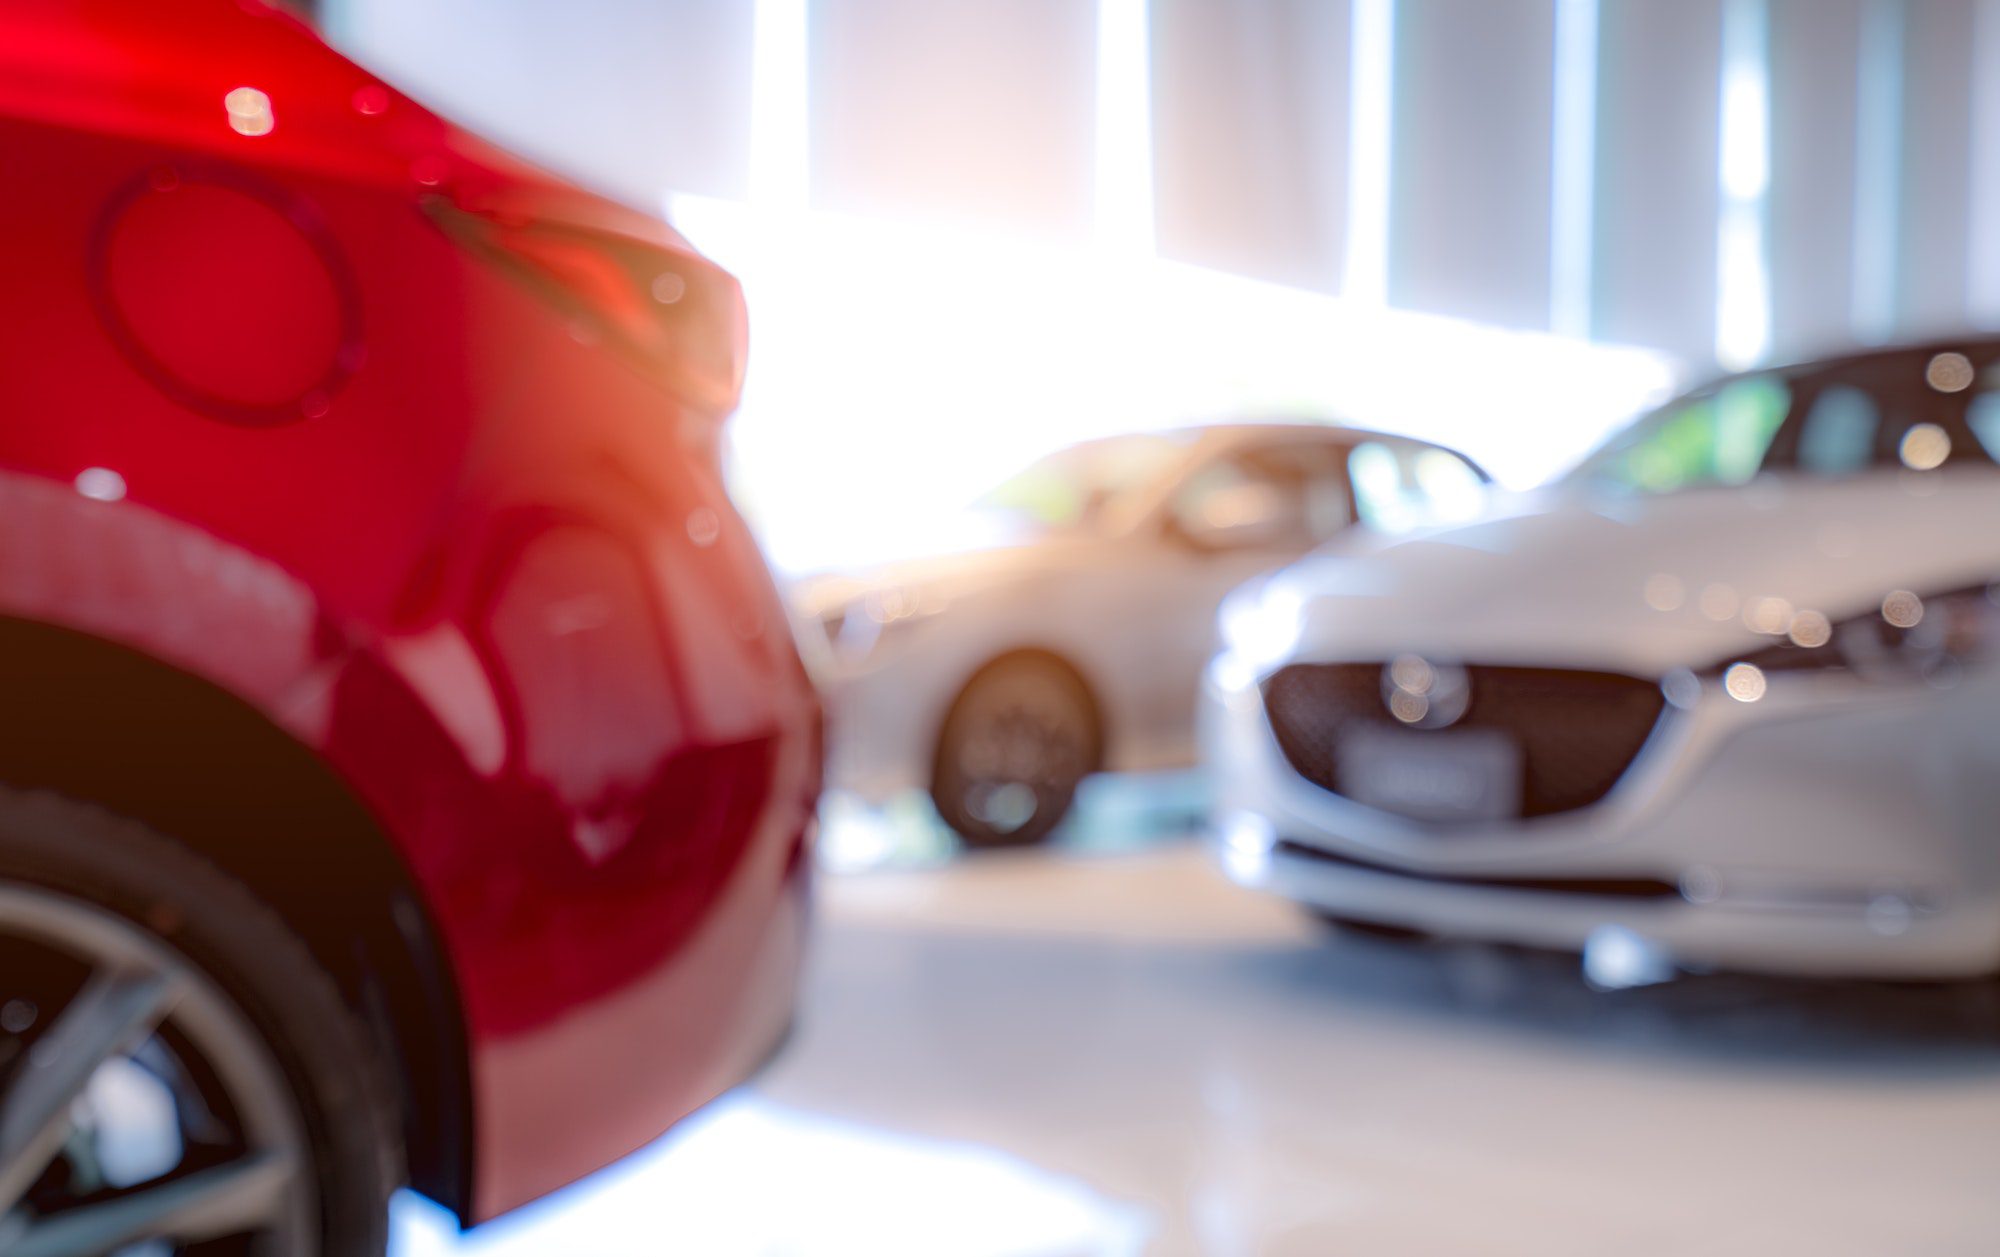 what are some challenges for automotive dealers and digital marketing?